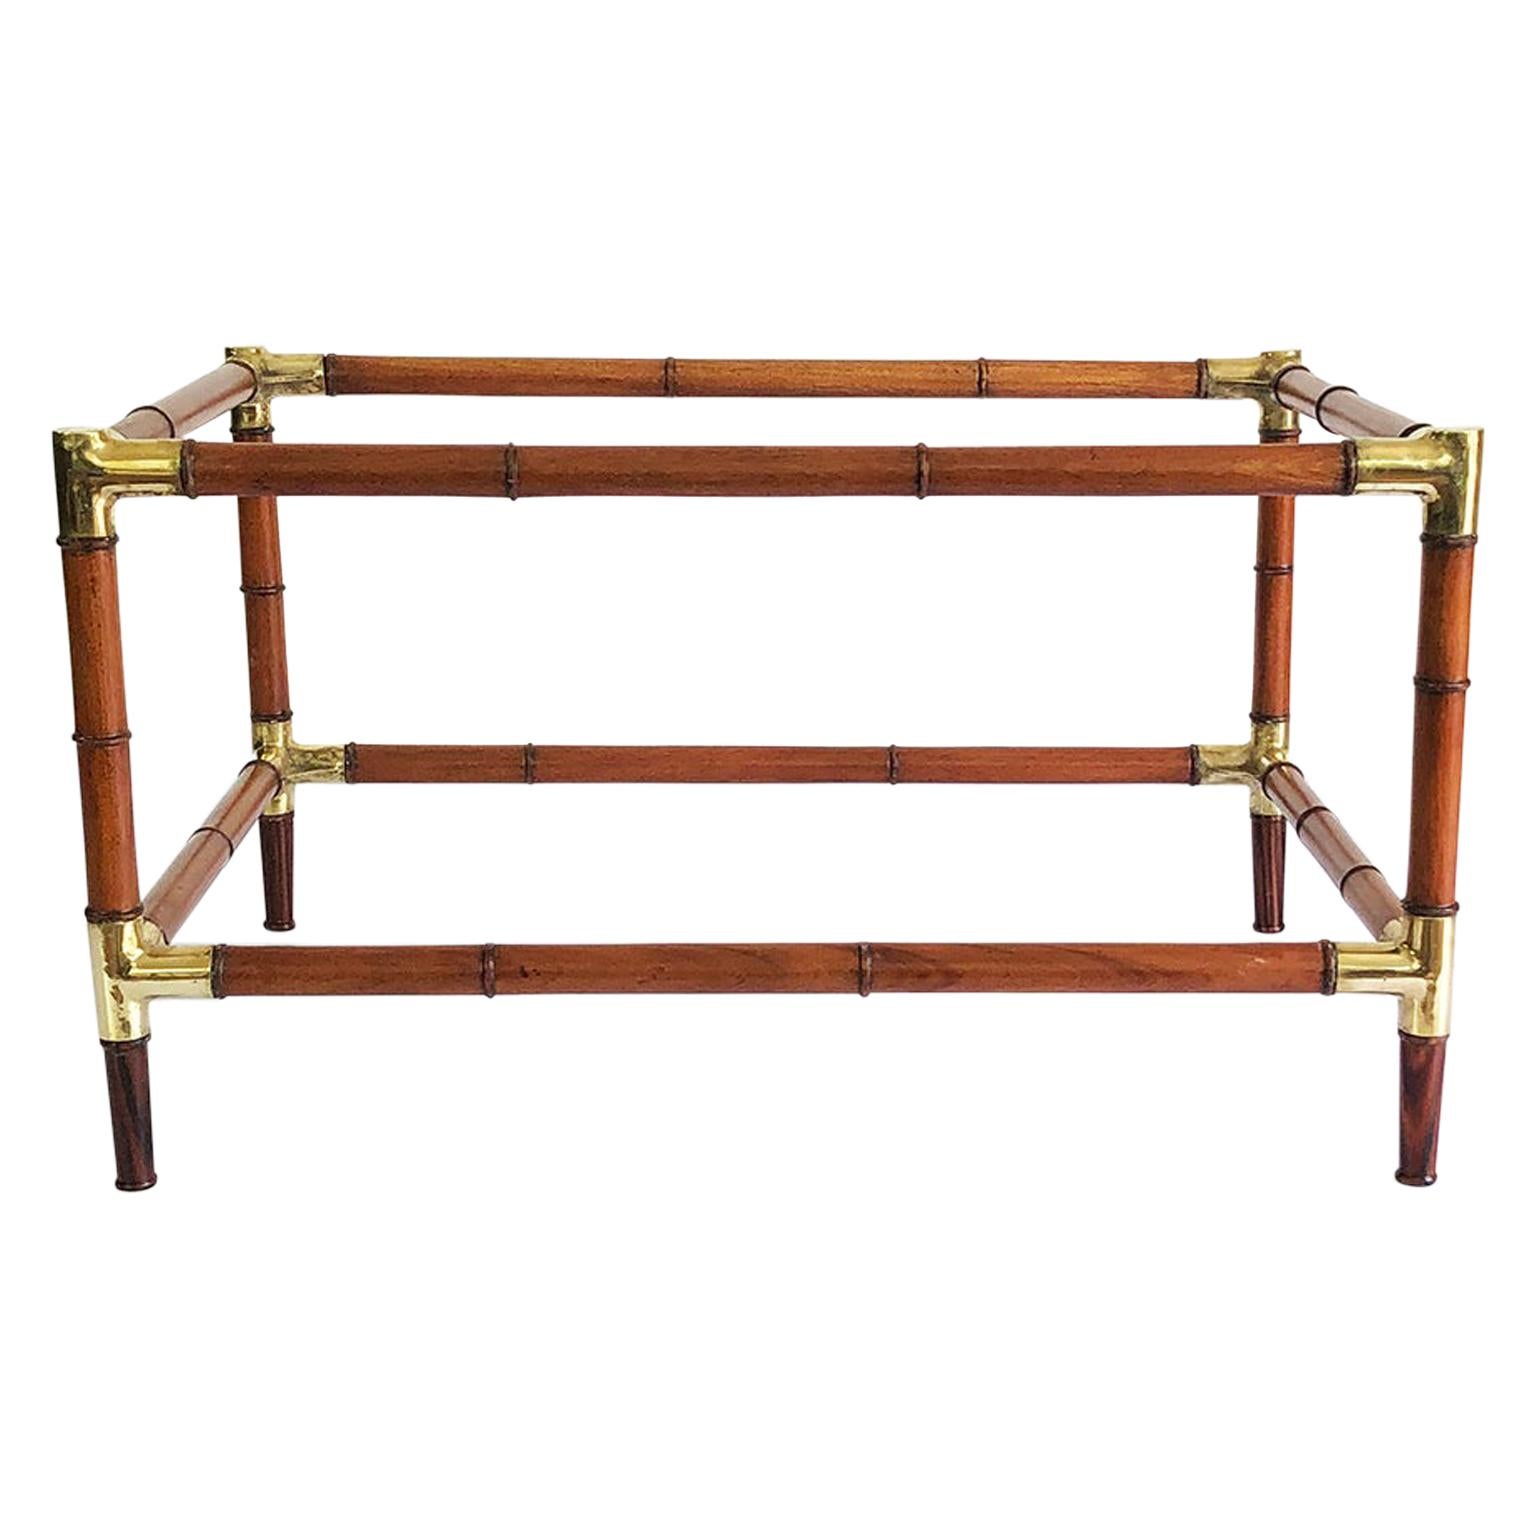 Midcentury Bamboo and Brass Mexican Center Table with Two Crystal Shelves. For Sale